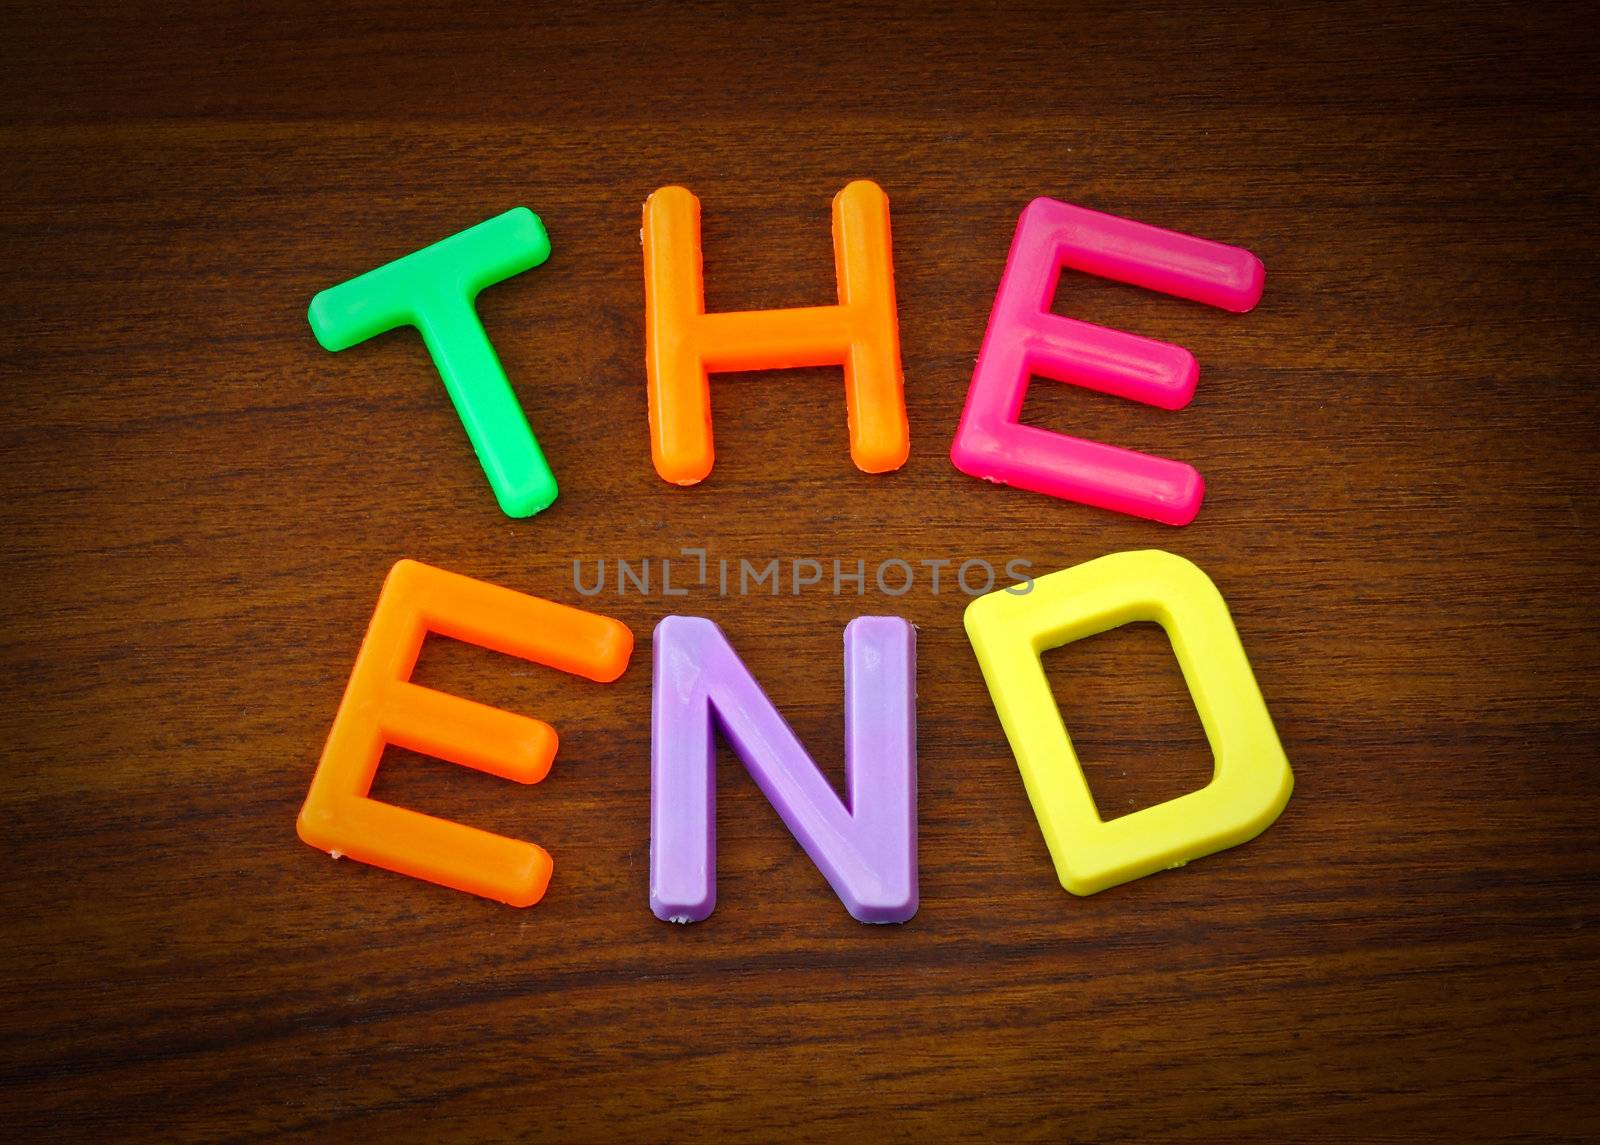 The end in colorful toy letters on wood background by nuchylee